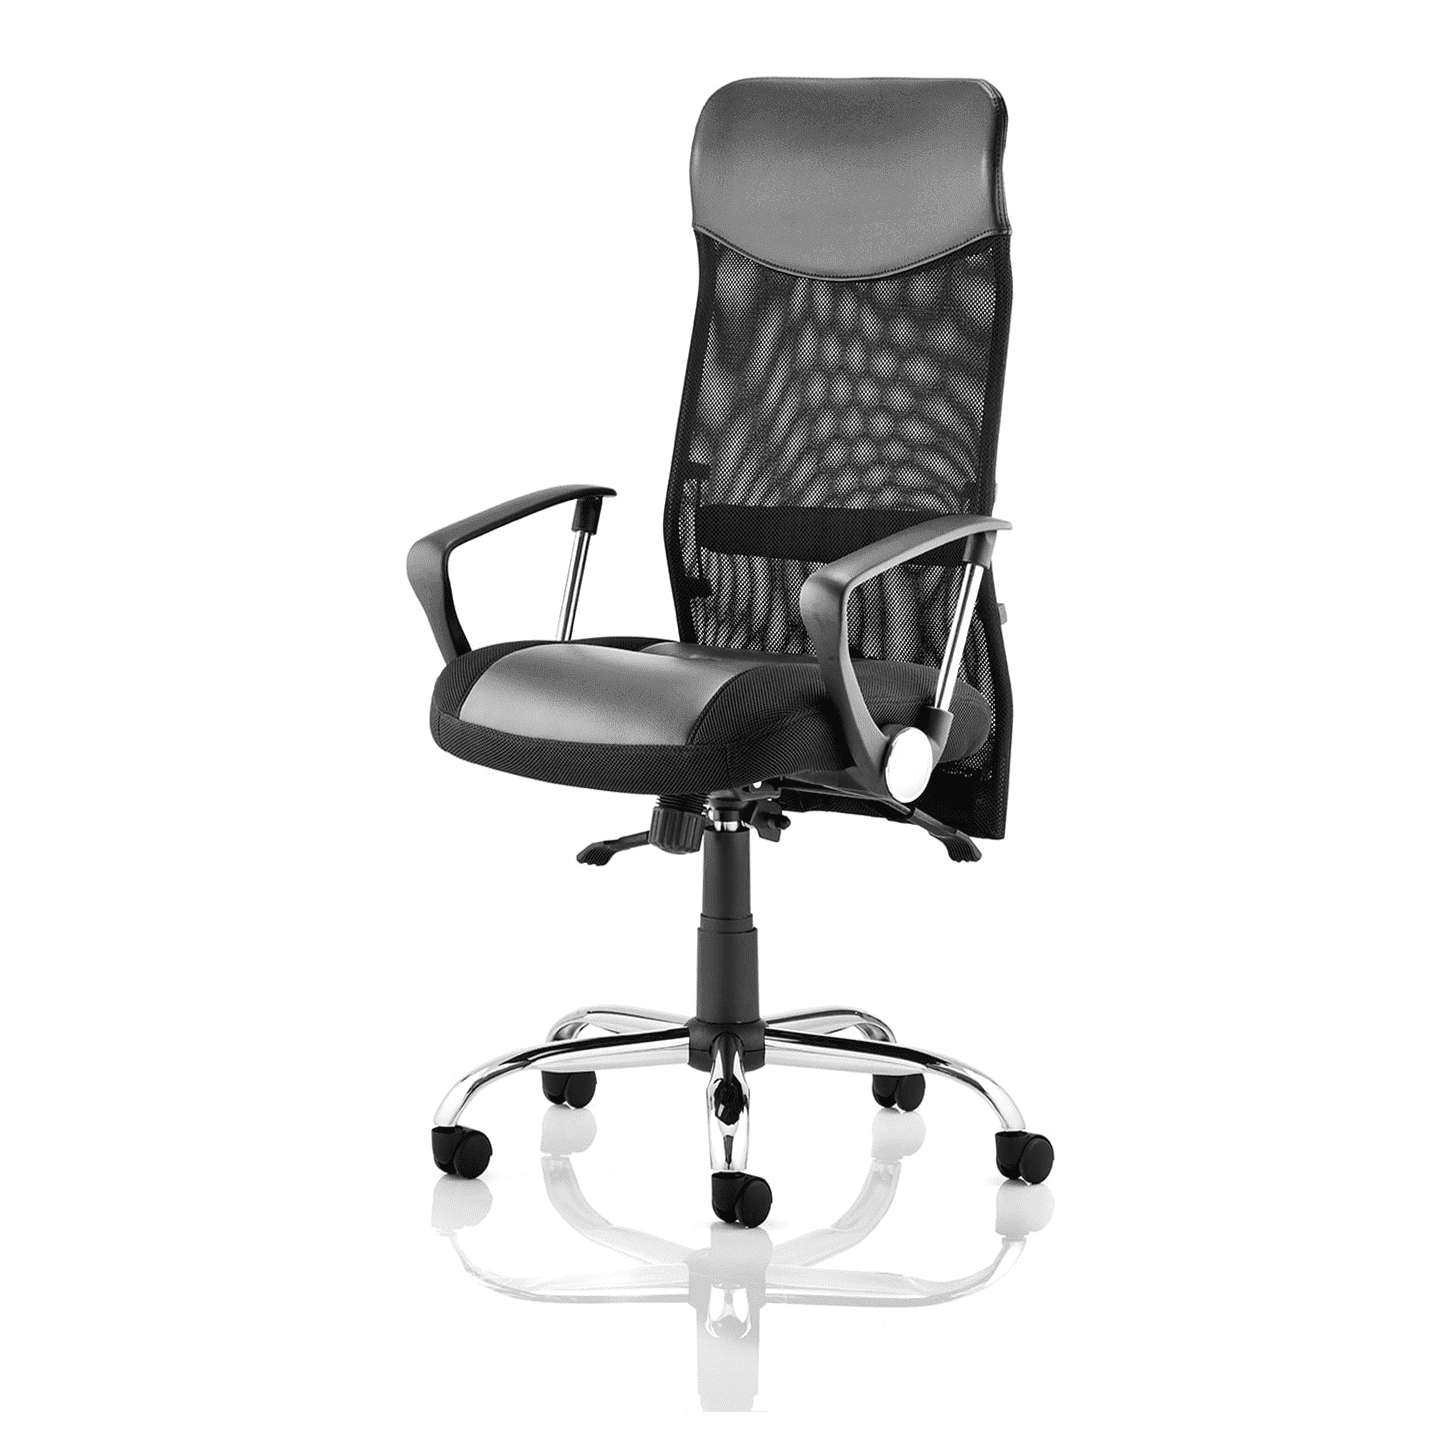 Vegas High Back Executive Office Chair - Black Soft Bonded Leather, Fixed Arms, Chrome Metal Frame, 125kg Capacity, 8hr Usage, Lumbar Support